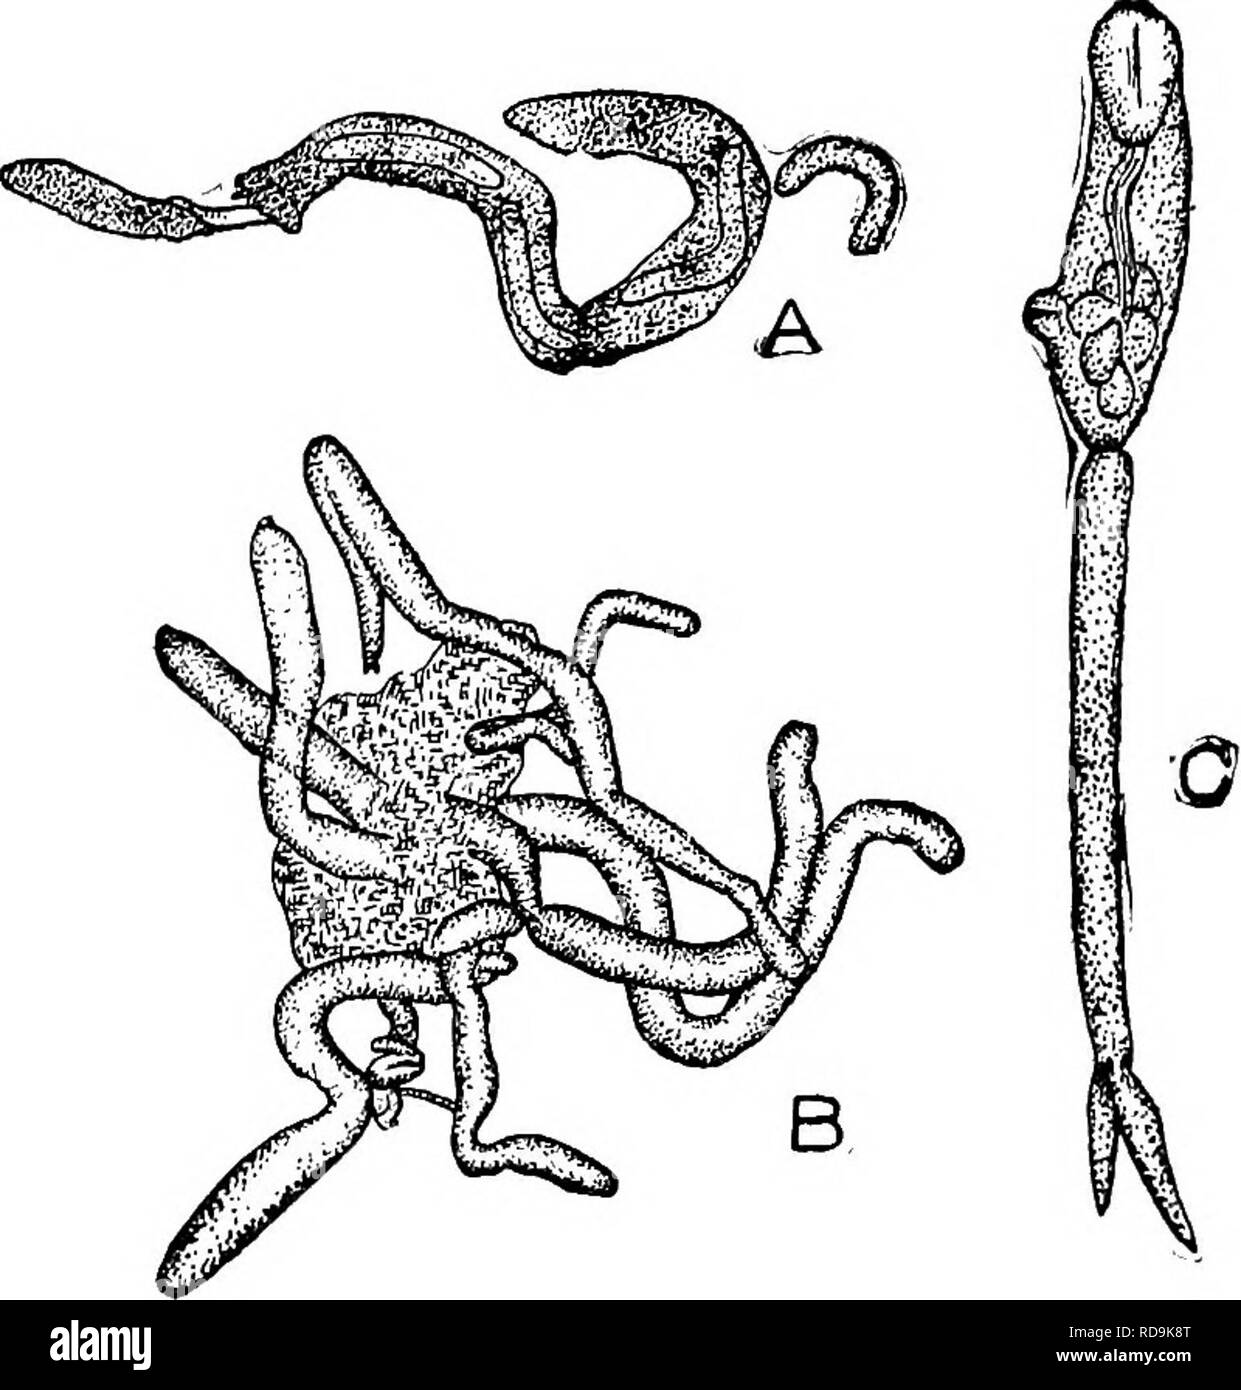 . Animal parasites and human disease. Medical parasitology; Insects as carriers of disease. 214 THE FLUKES worked on the life history of this species, chiefly at El Marg, near Cairo, Egypt. He found that Schistosoma embryos are attracted by several species of fresh-water snails and that they penetrate the bodies of three species, Bullinus contortus (Fig. 66A), B. dybowskii and Planorbis boissyi (Fig. 66B). Here they undergo transformation into sporocysts, from which daugh- ter sporocysts bud off (Fig. 67). After leaving the mother cyst the daughter sporocysts migrate into the tissue of the liv Stock Photo